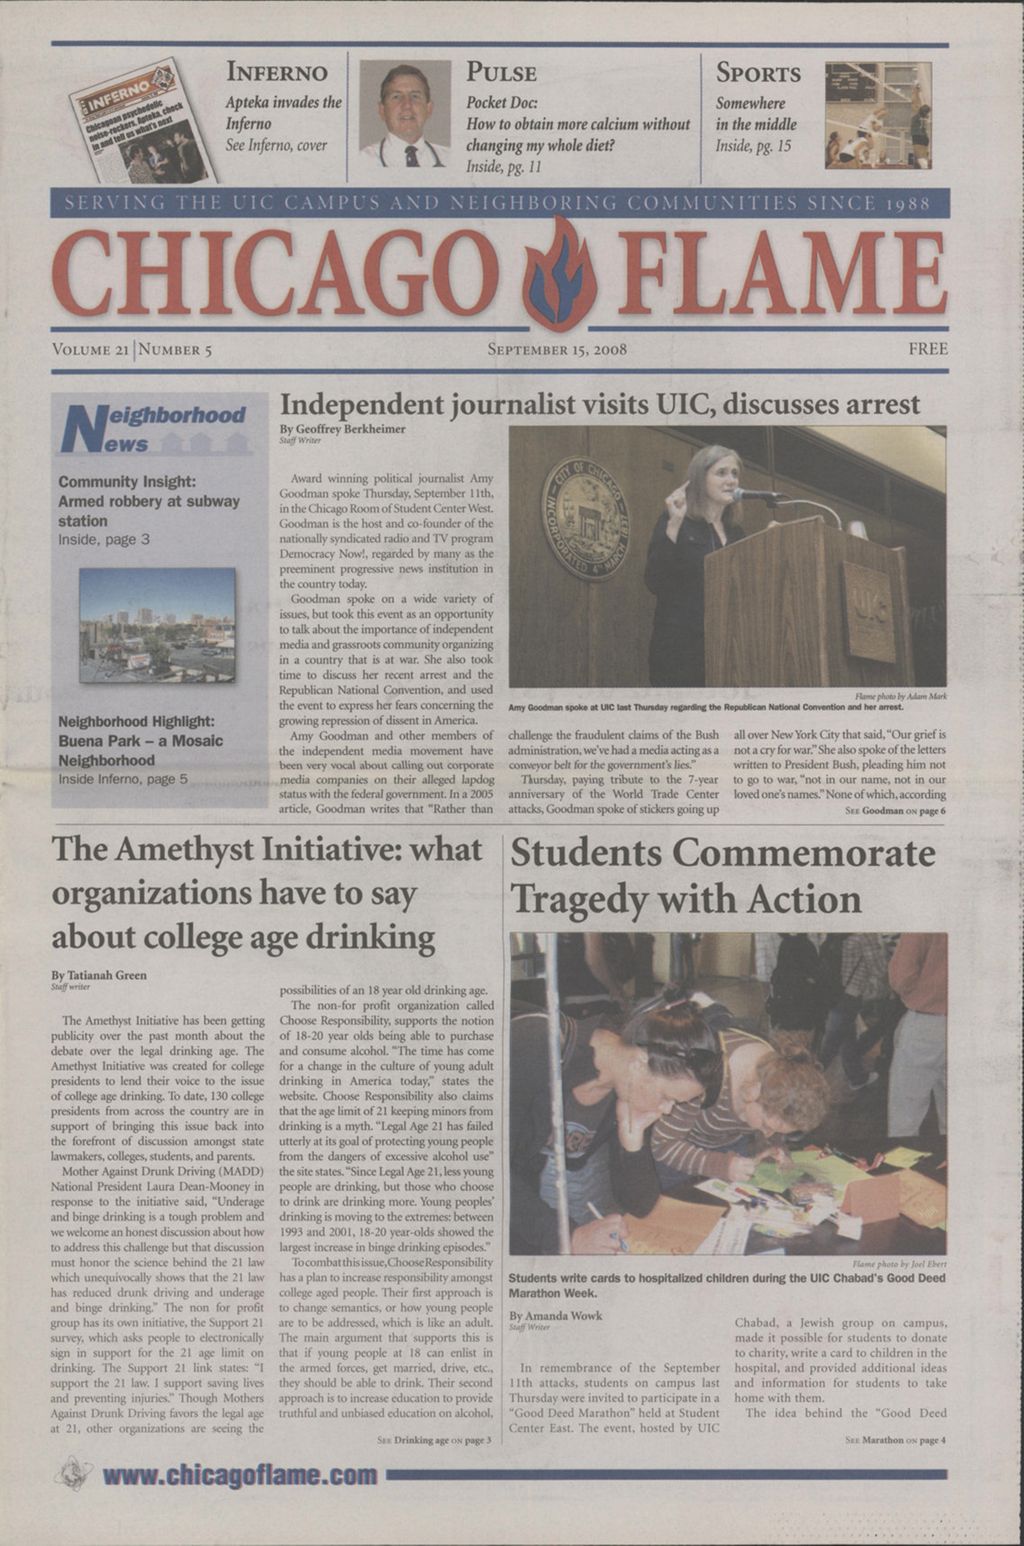 Miniature of Chicago Flame (September 15, 2008)